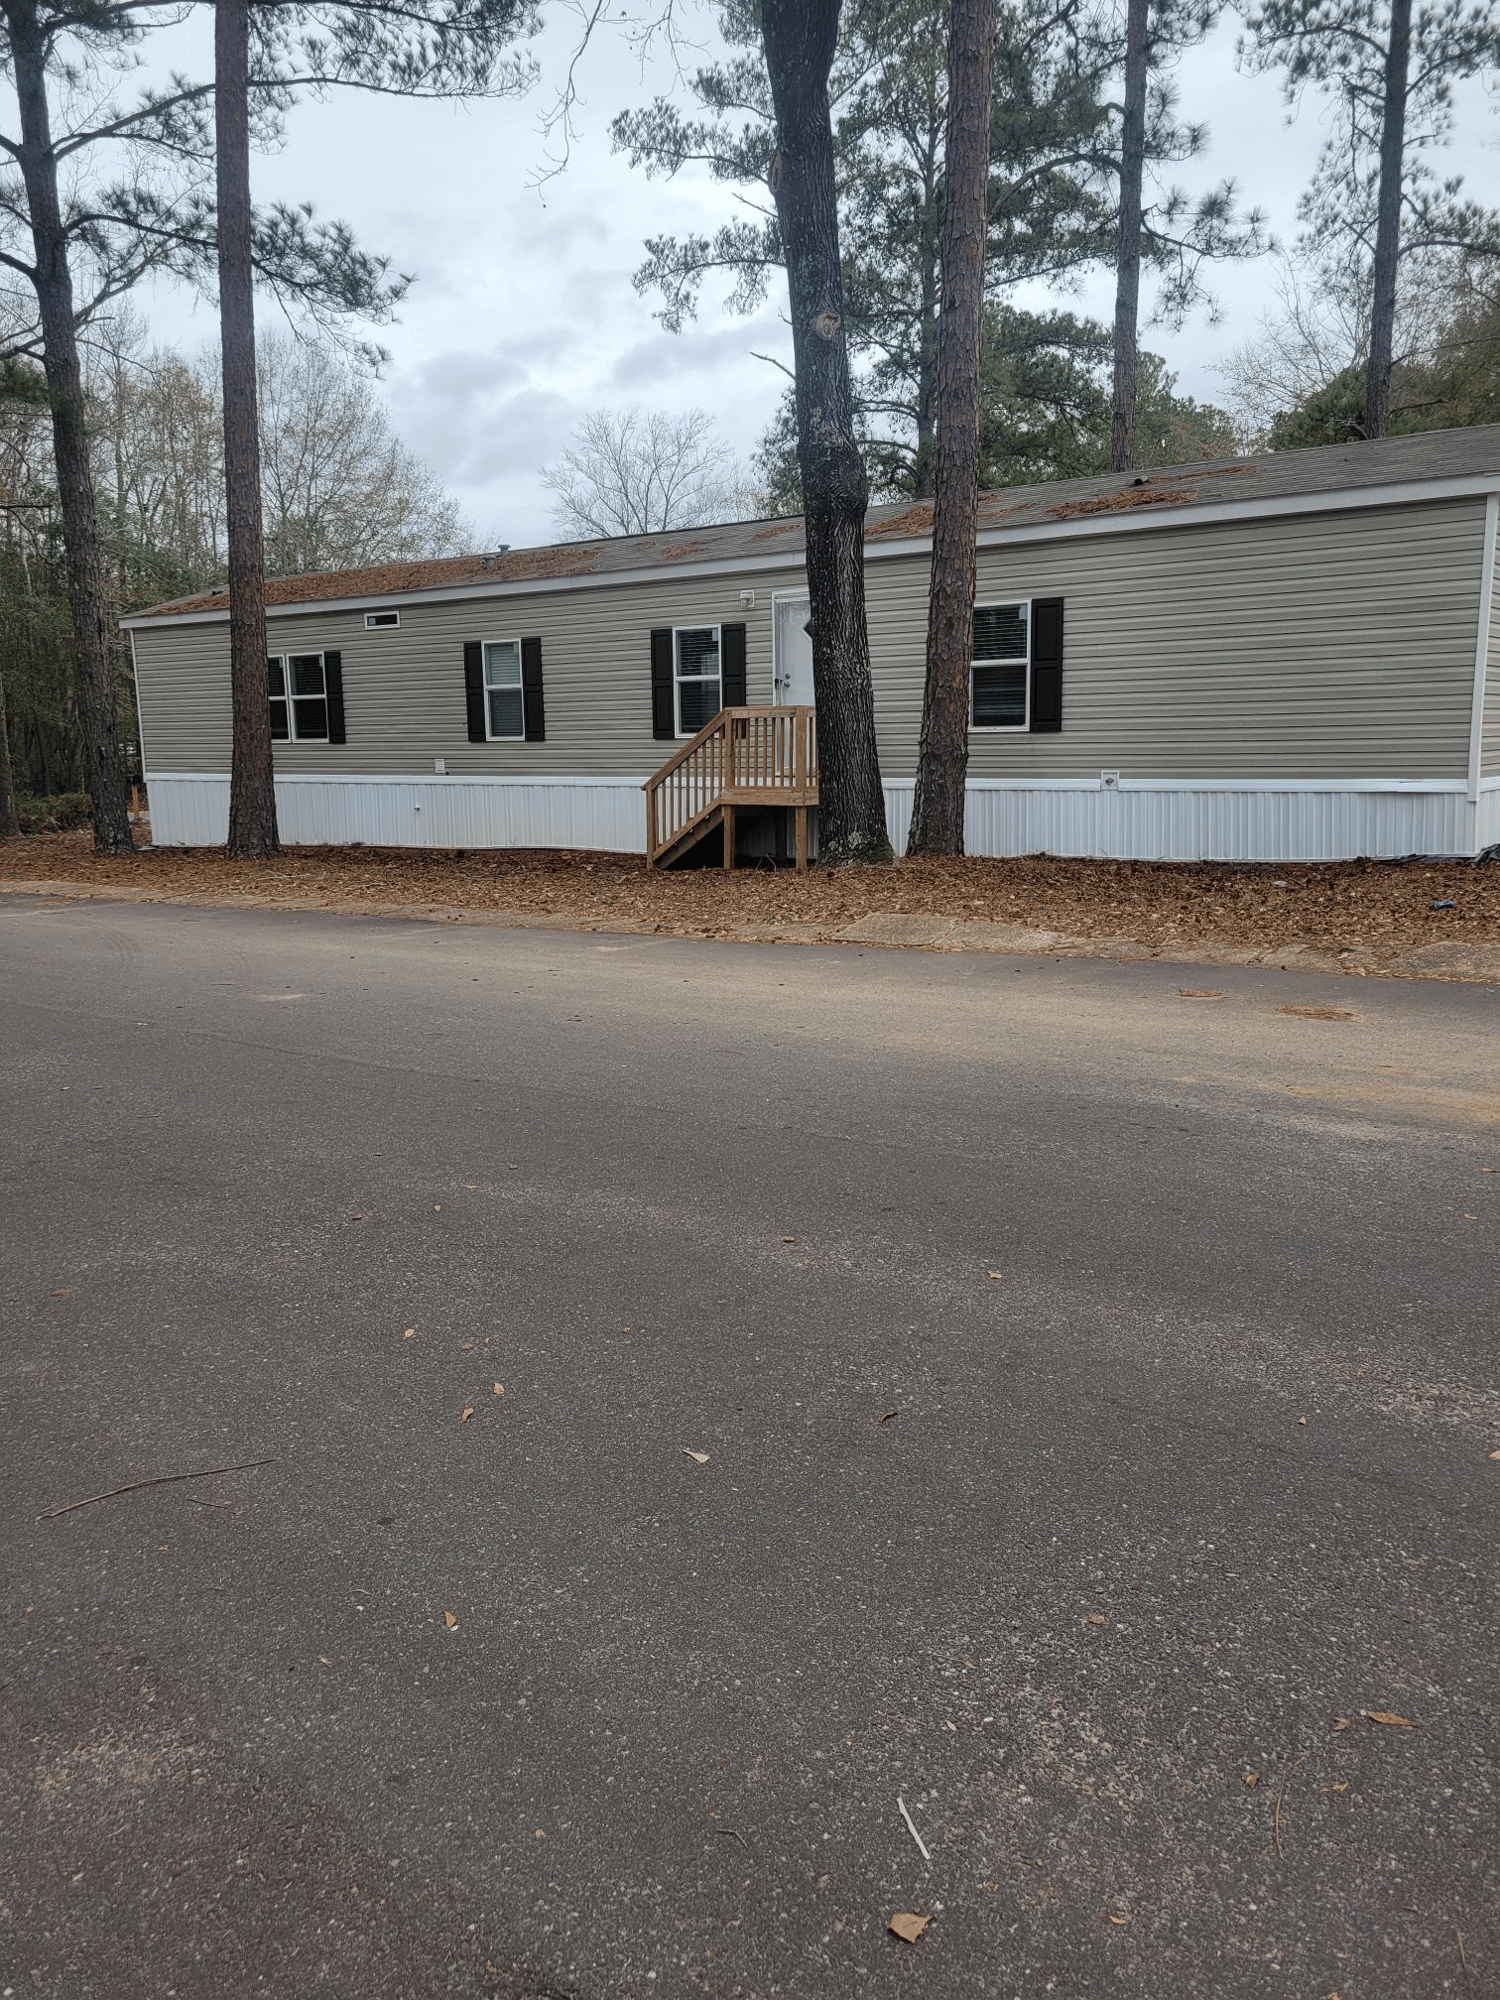 Shade Tree Manufactured Housing Community with Affordable Homes Street View